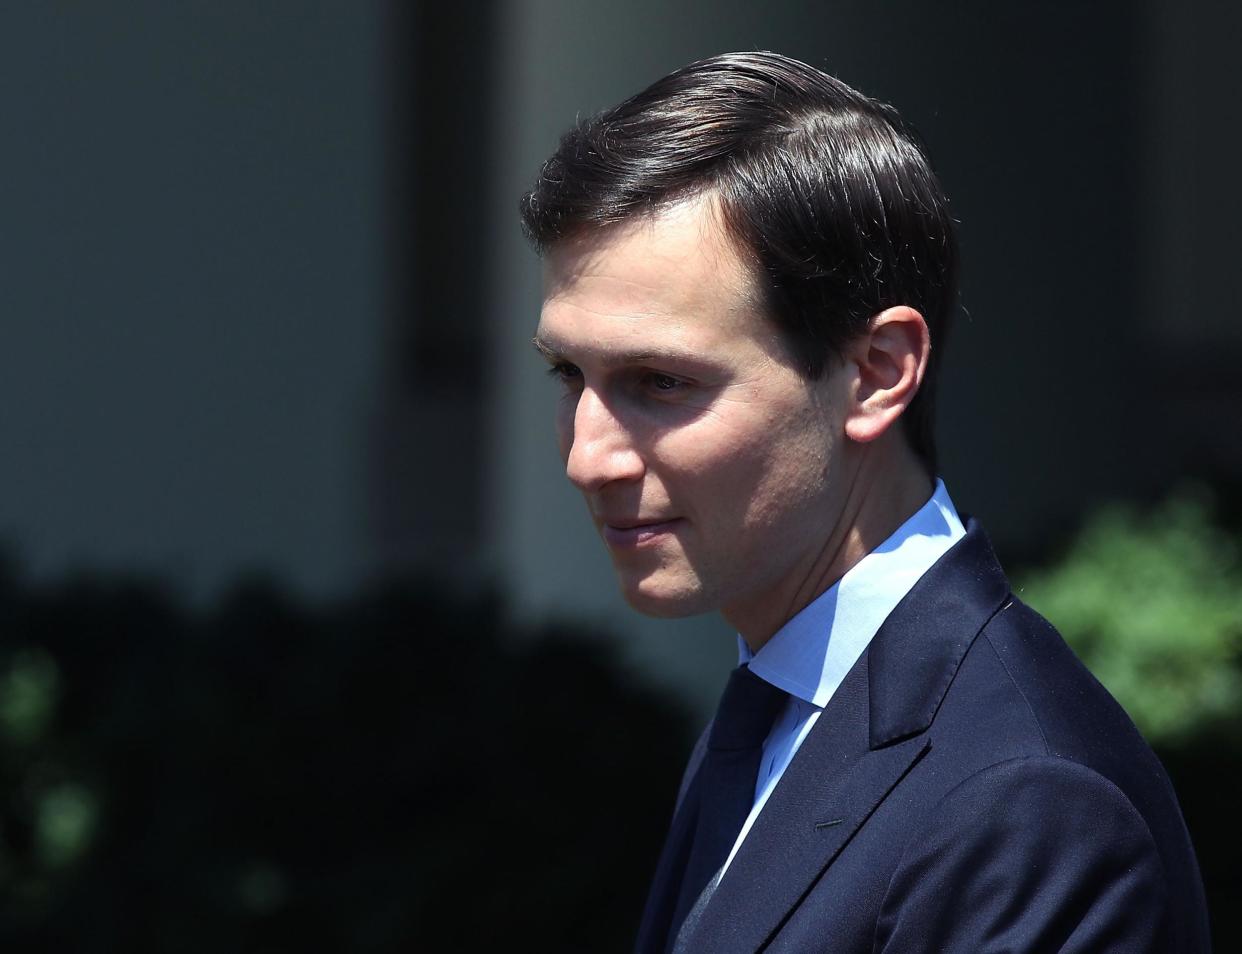 Jared Kushner attends a joint statement by US President Donald Trump and South Korean President Moon Jae-in in the Rose Garden: Getty